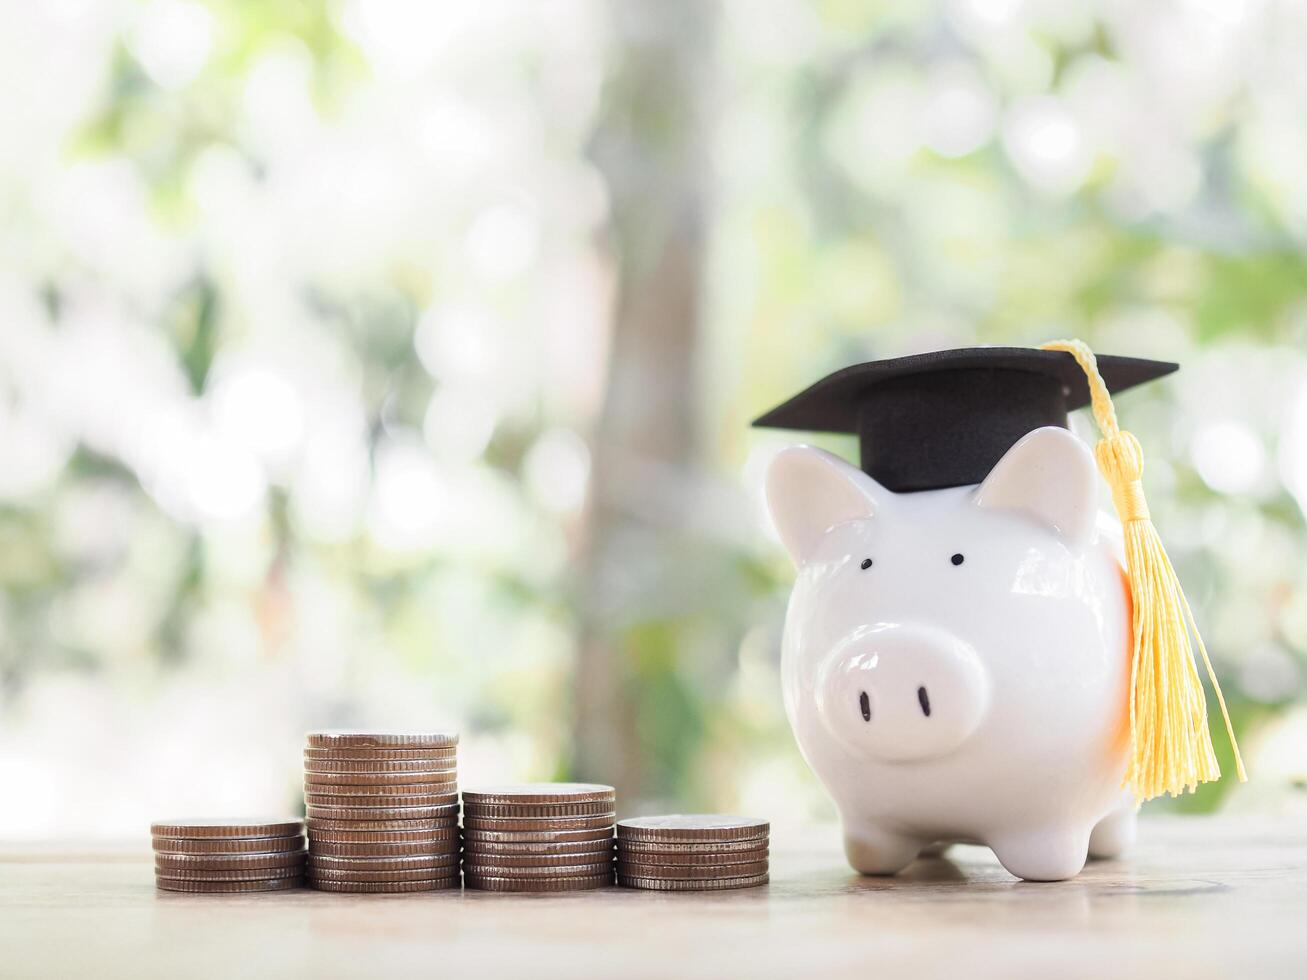 Piggy bank with graduation hat and stack of coins. The concept of saving money for education, student loan, scholarship, tuition fees in future photo